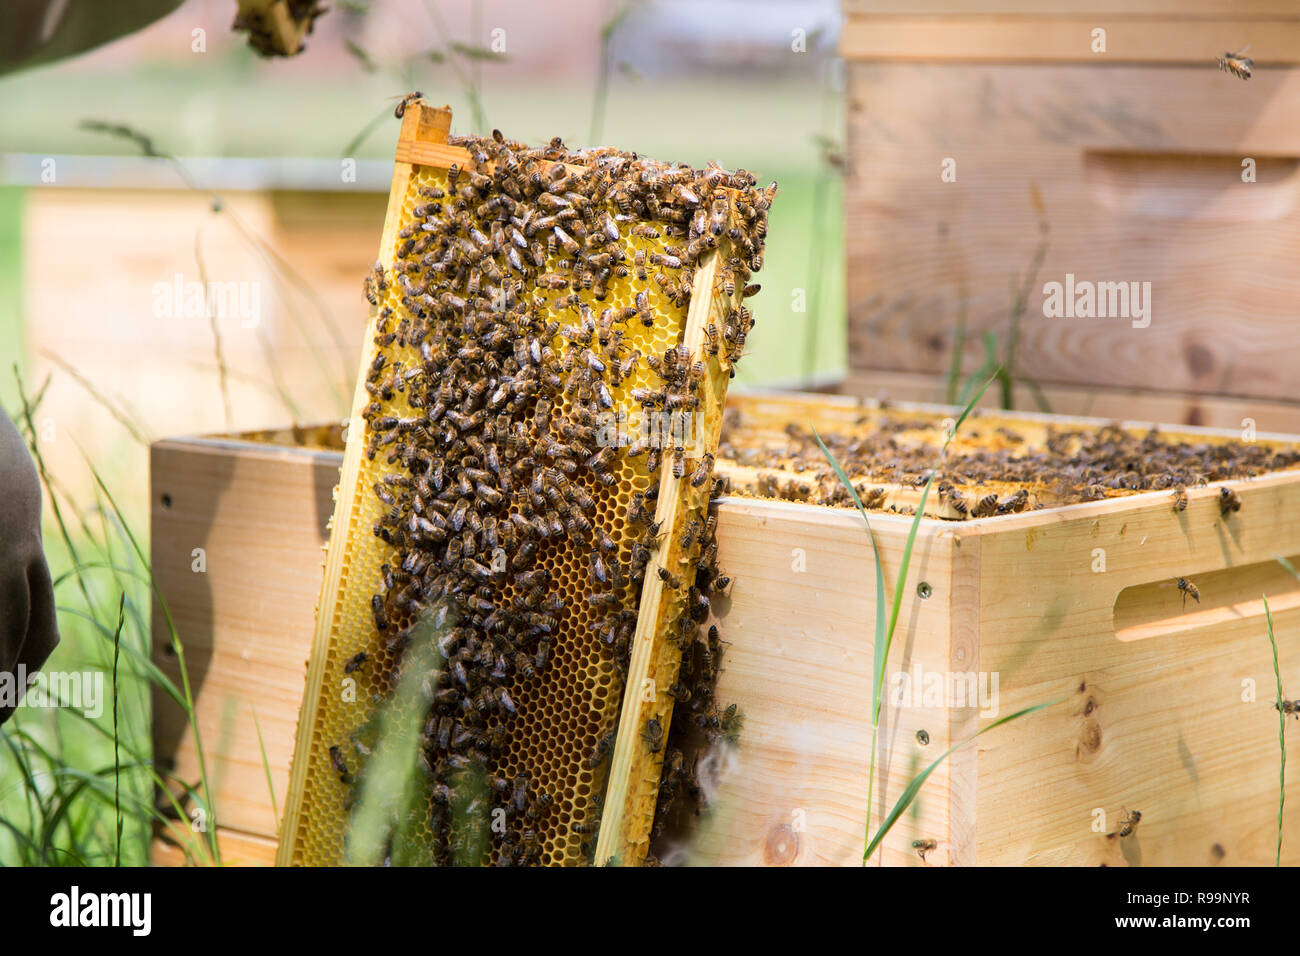 Apiary hive frame with bees wax structure full of fresh bee honey in honeycombs standing aside the bee hive Stock Photo